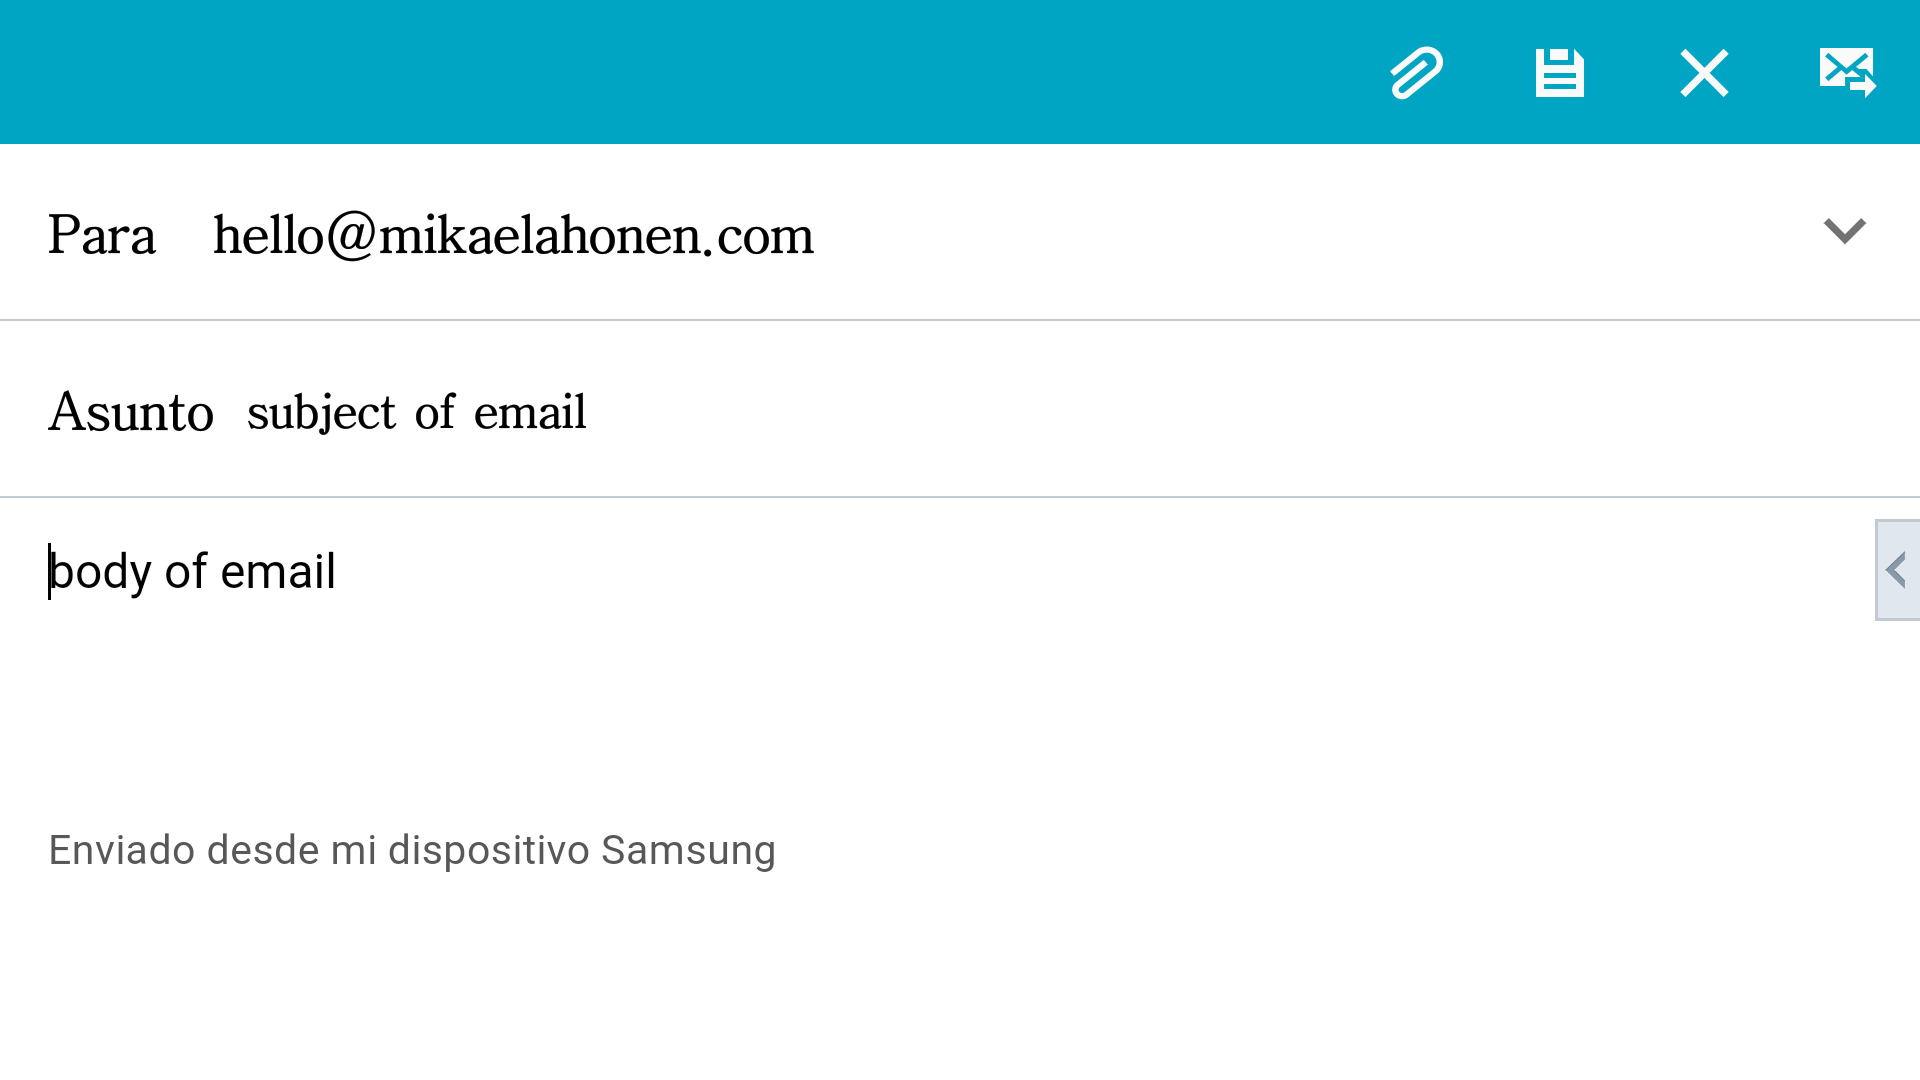 Android app takes you to the chosen email app. For learning purposes my Android is in Spanish.